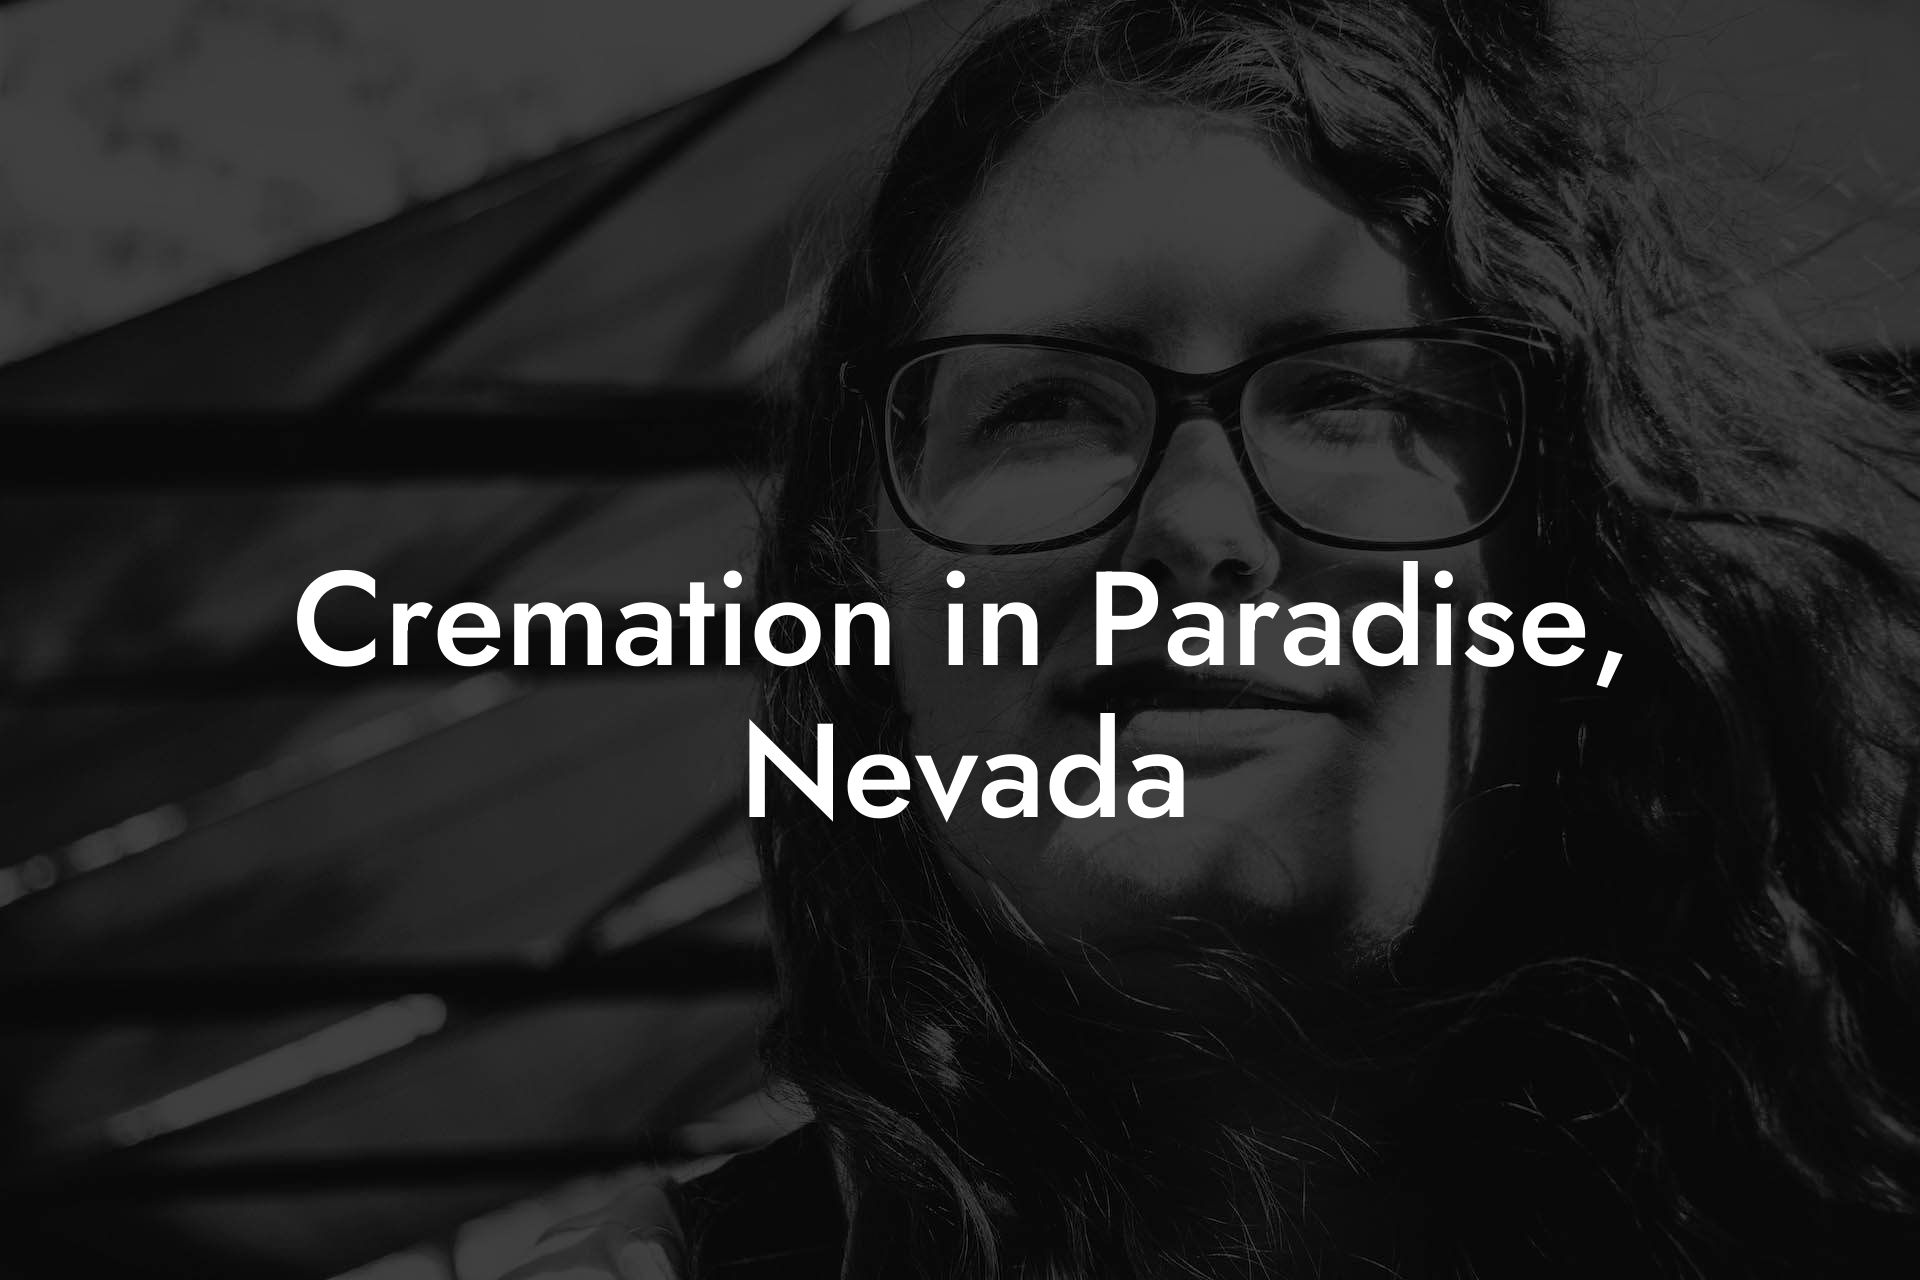 Cremation in Paradise, Nevada